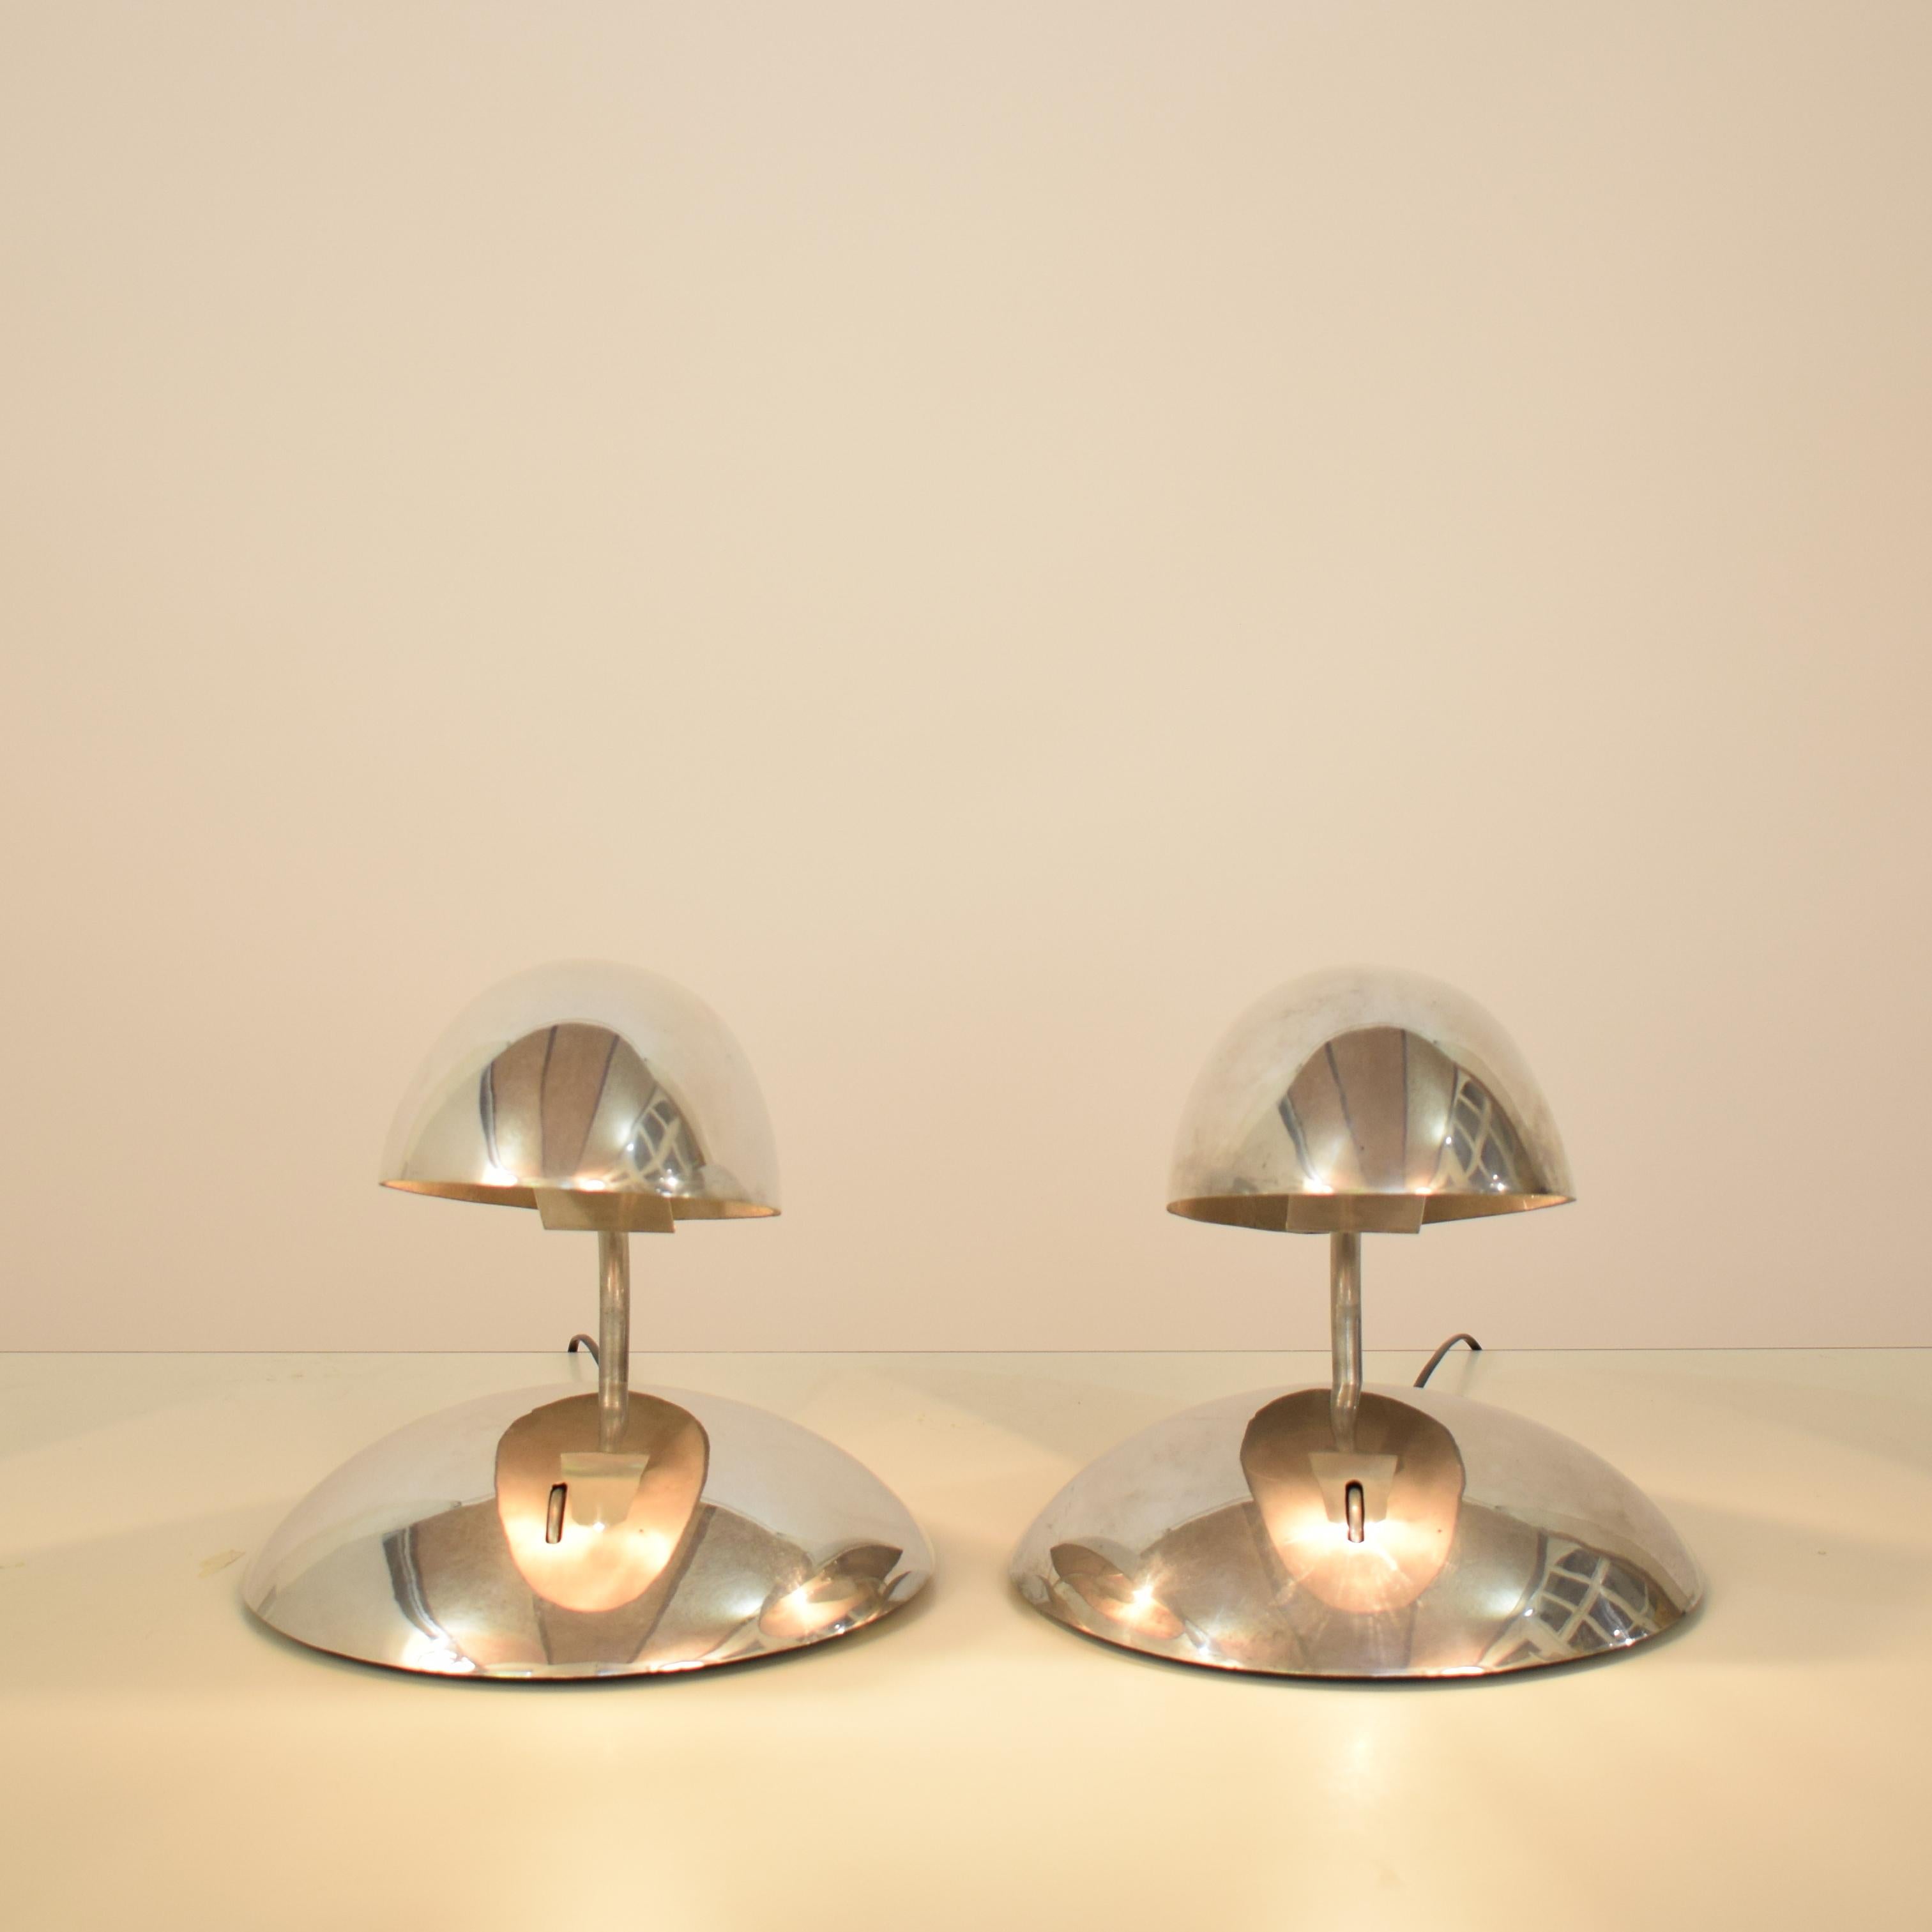 Pair of Polished Aluminium Space Age / Mid Century Table Lamps from the 1980s For Sale 5